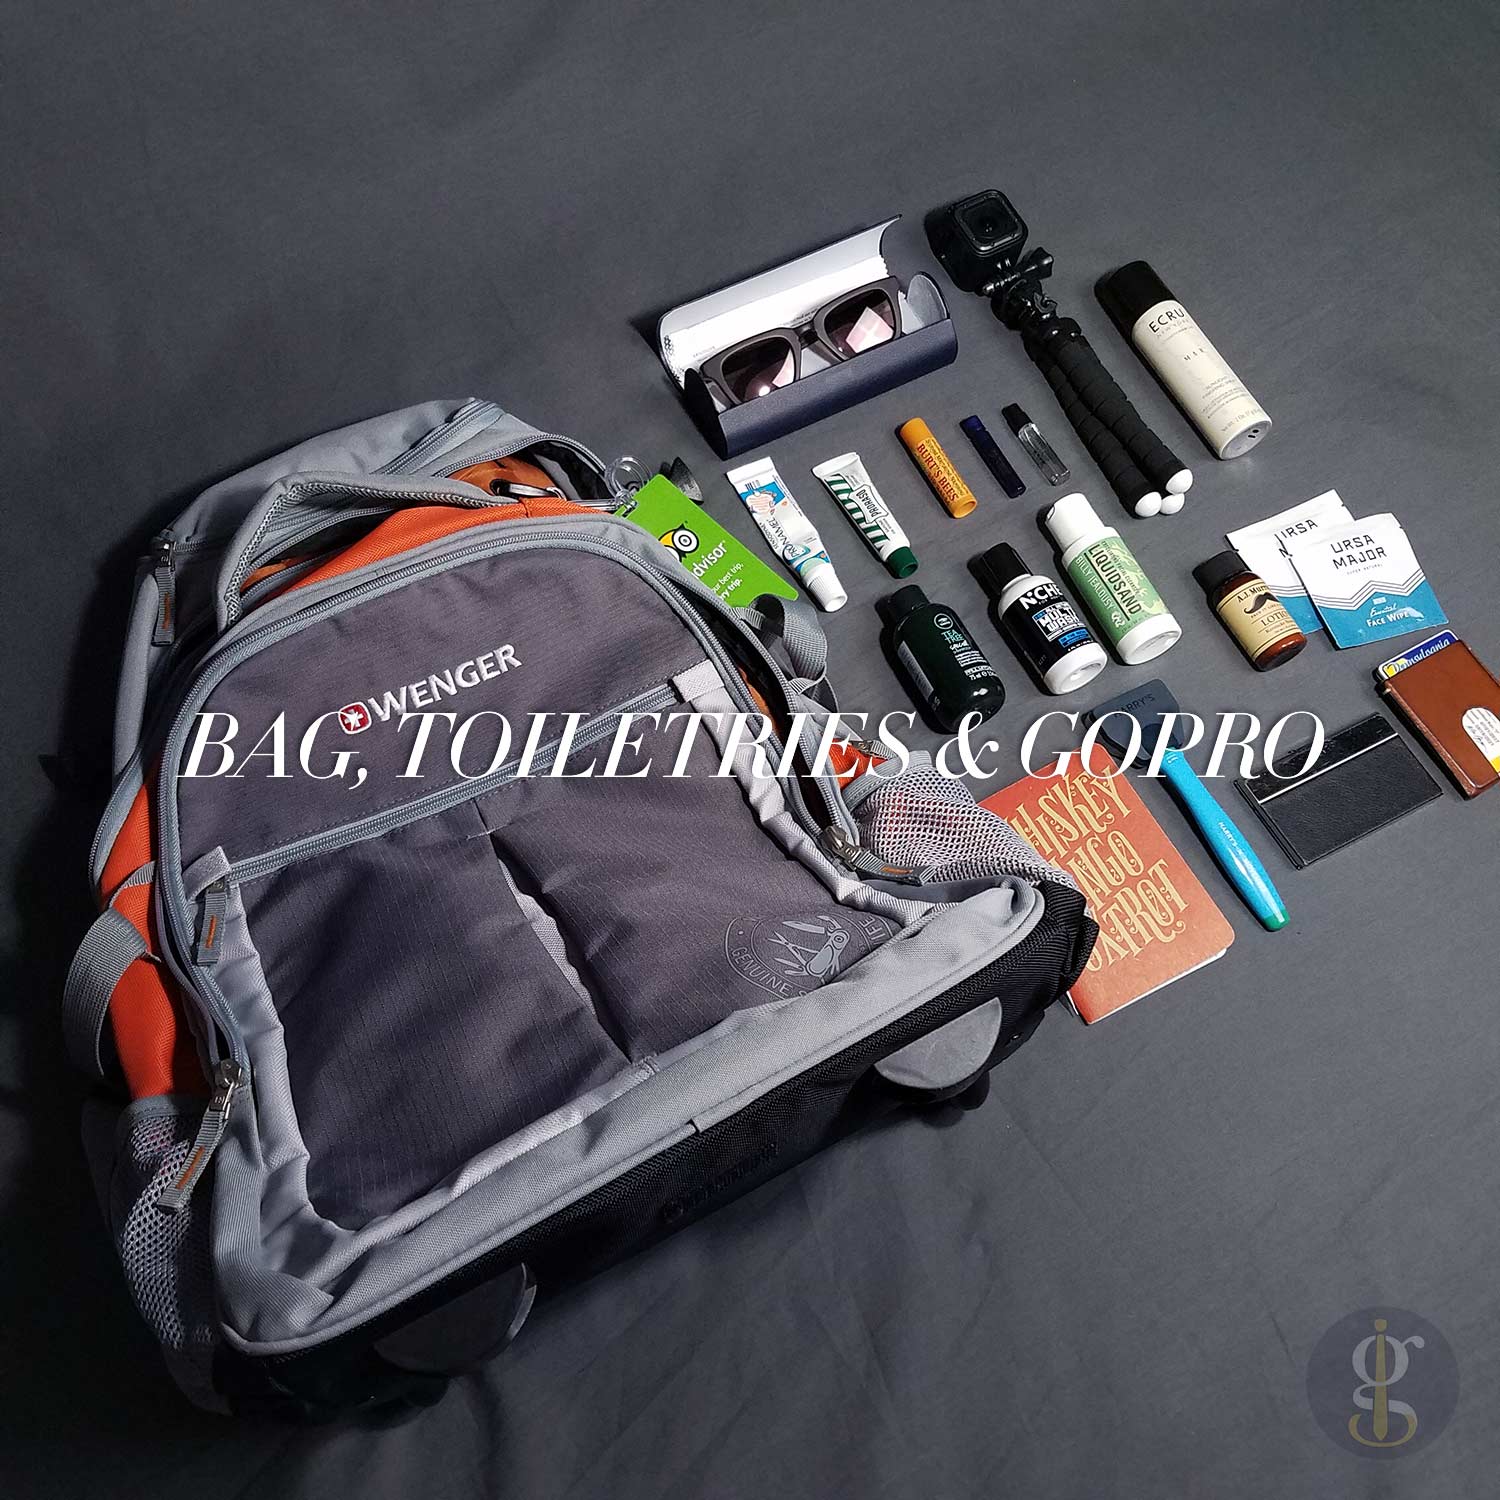 Bag With Toiletries And GoPro | GENTLEMAN WITHIN